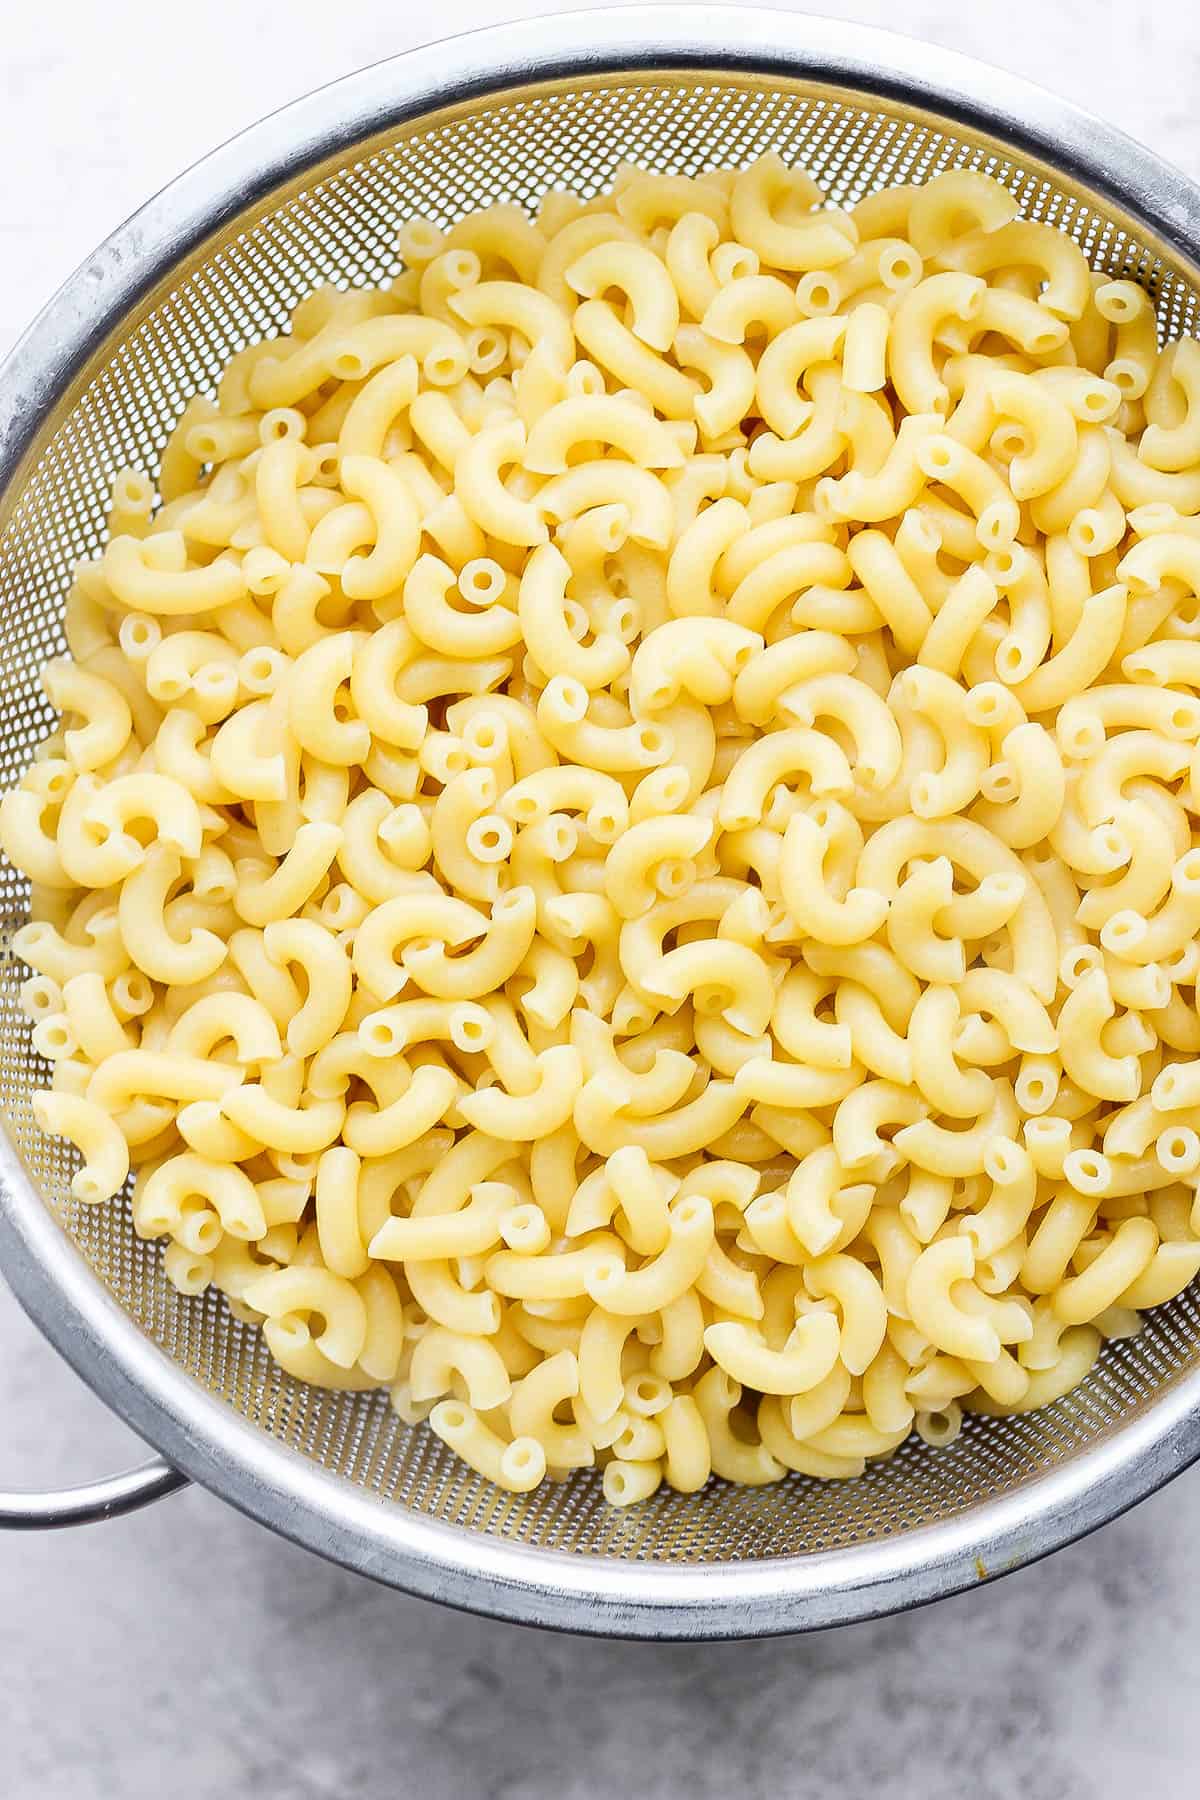 Cooked macaroni noodles draining in a colander.